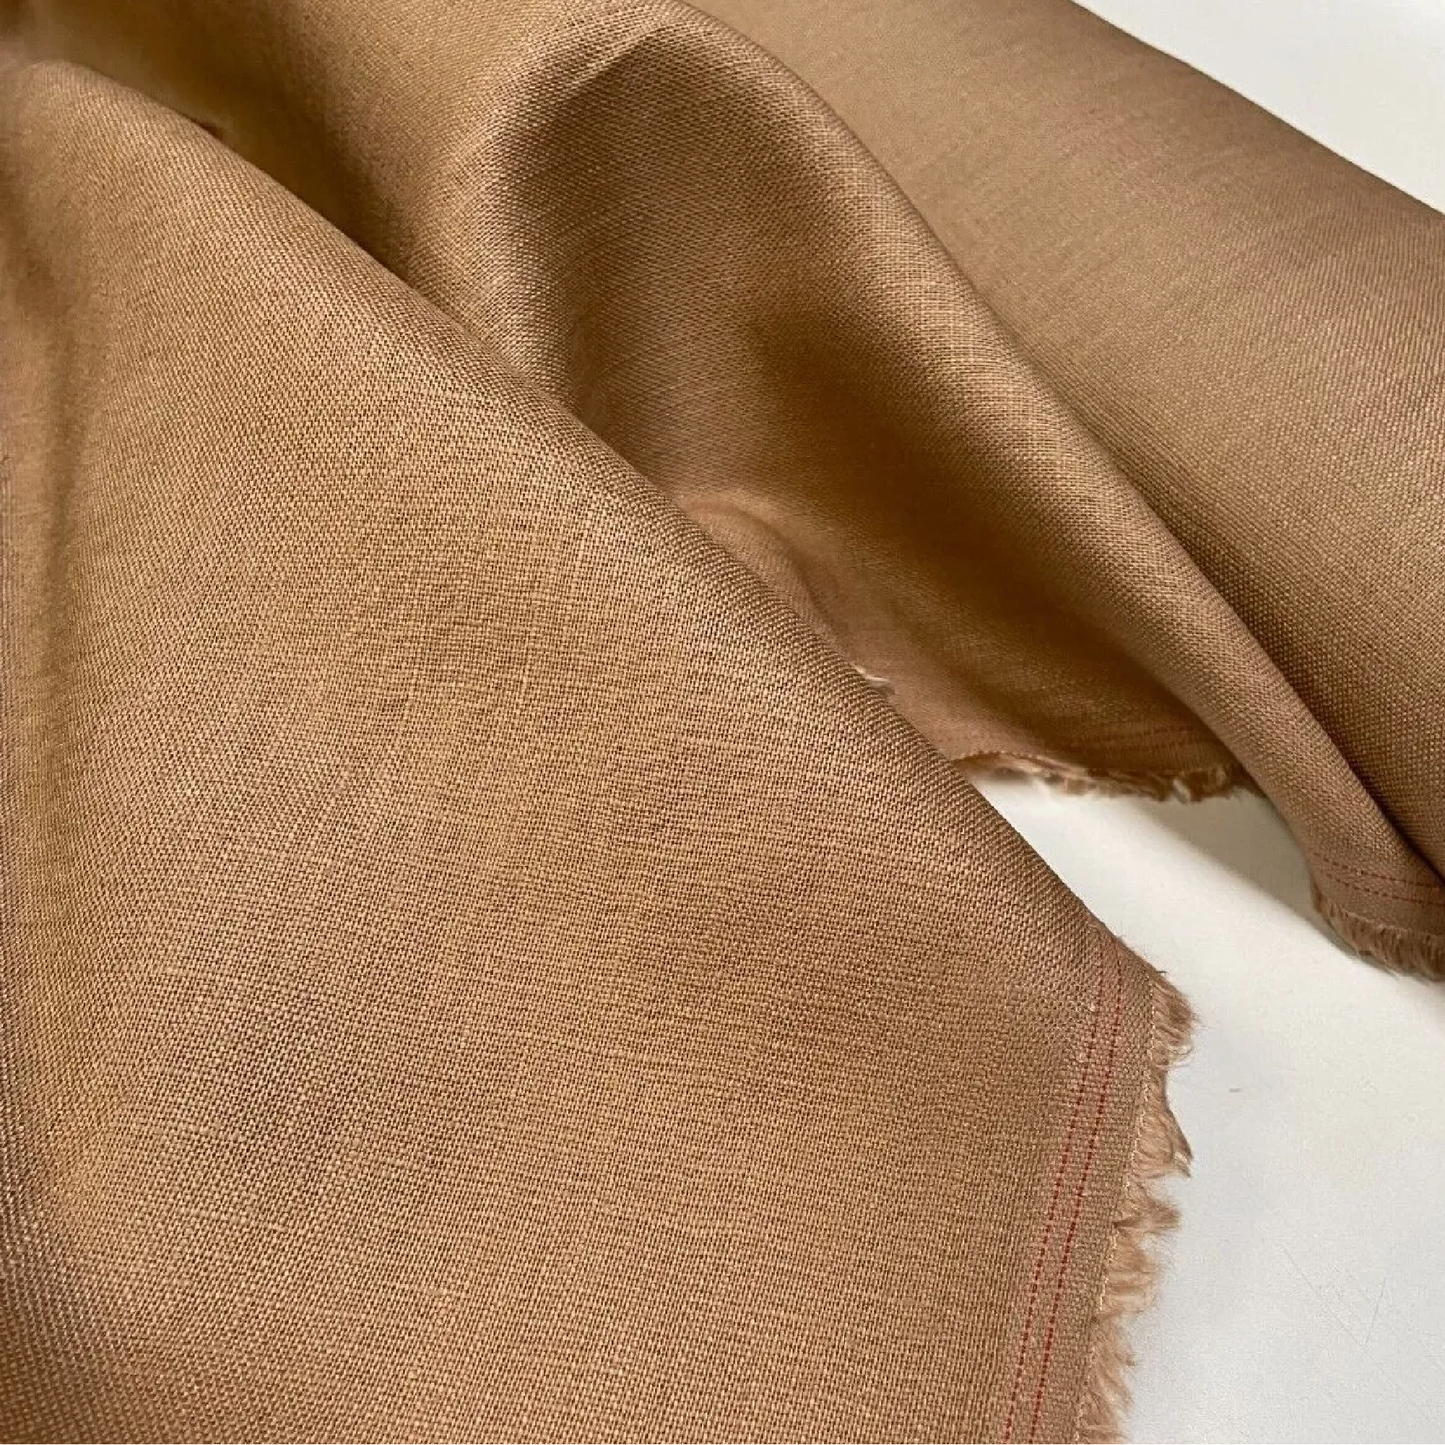 Linen Fabric 100% softened, stonewashed, 145cm / 57 inches width linen fabric for bedding and clothing, DIY sewing gift, 13 colors available